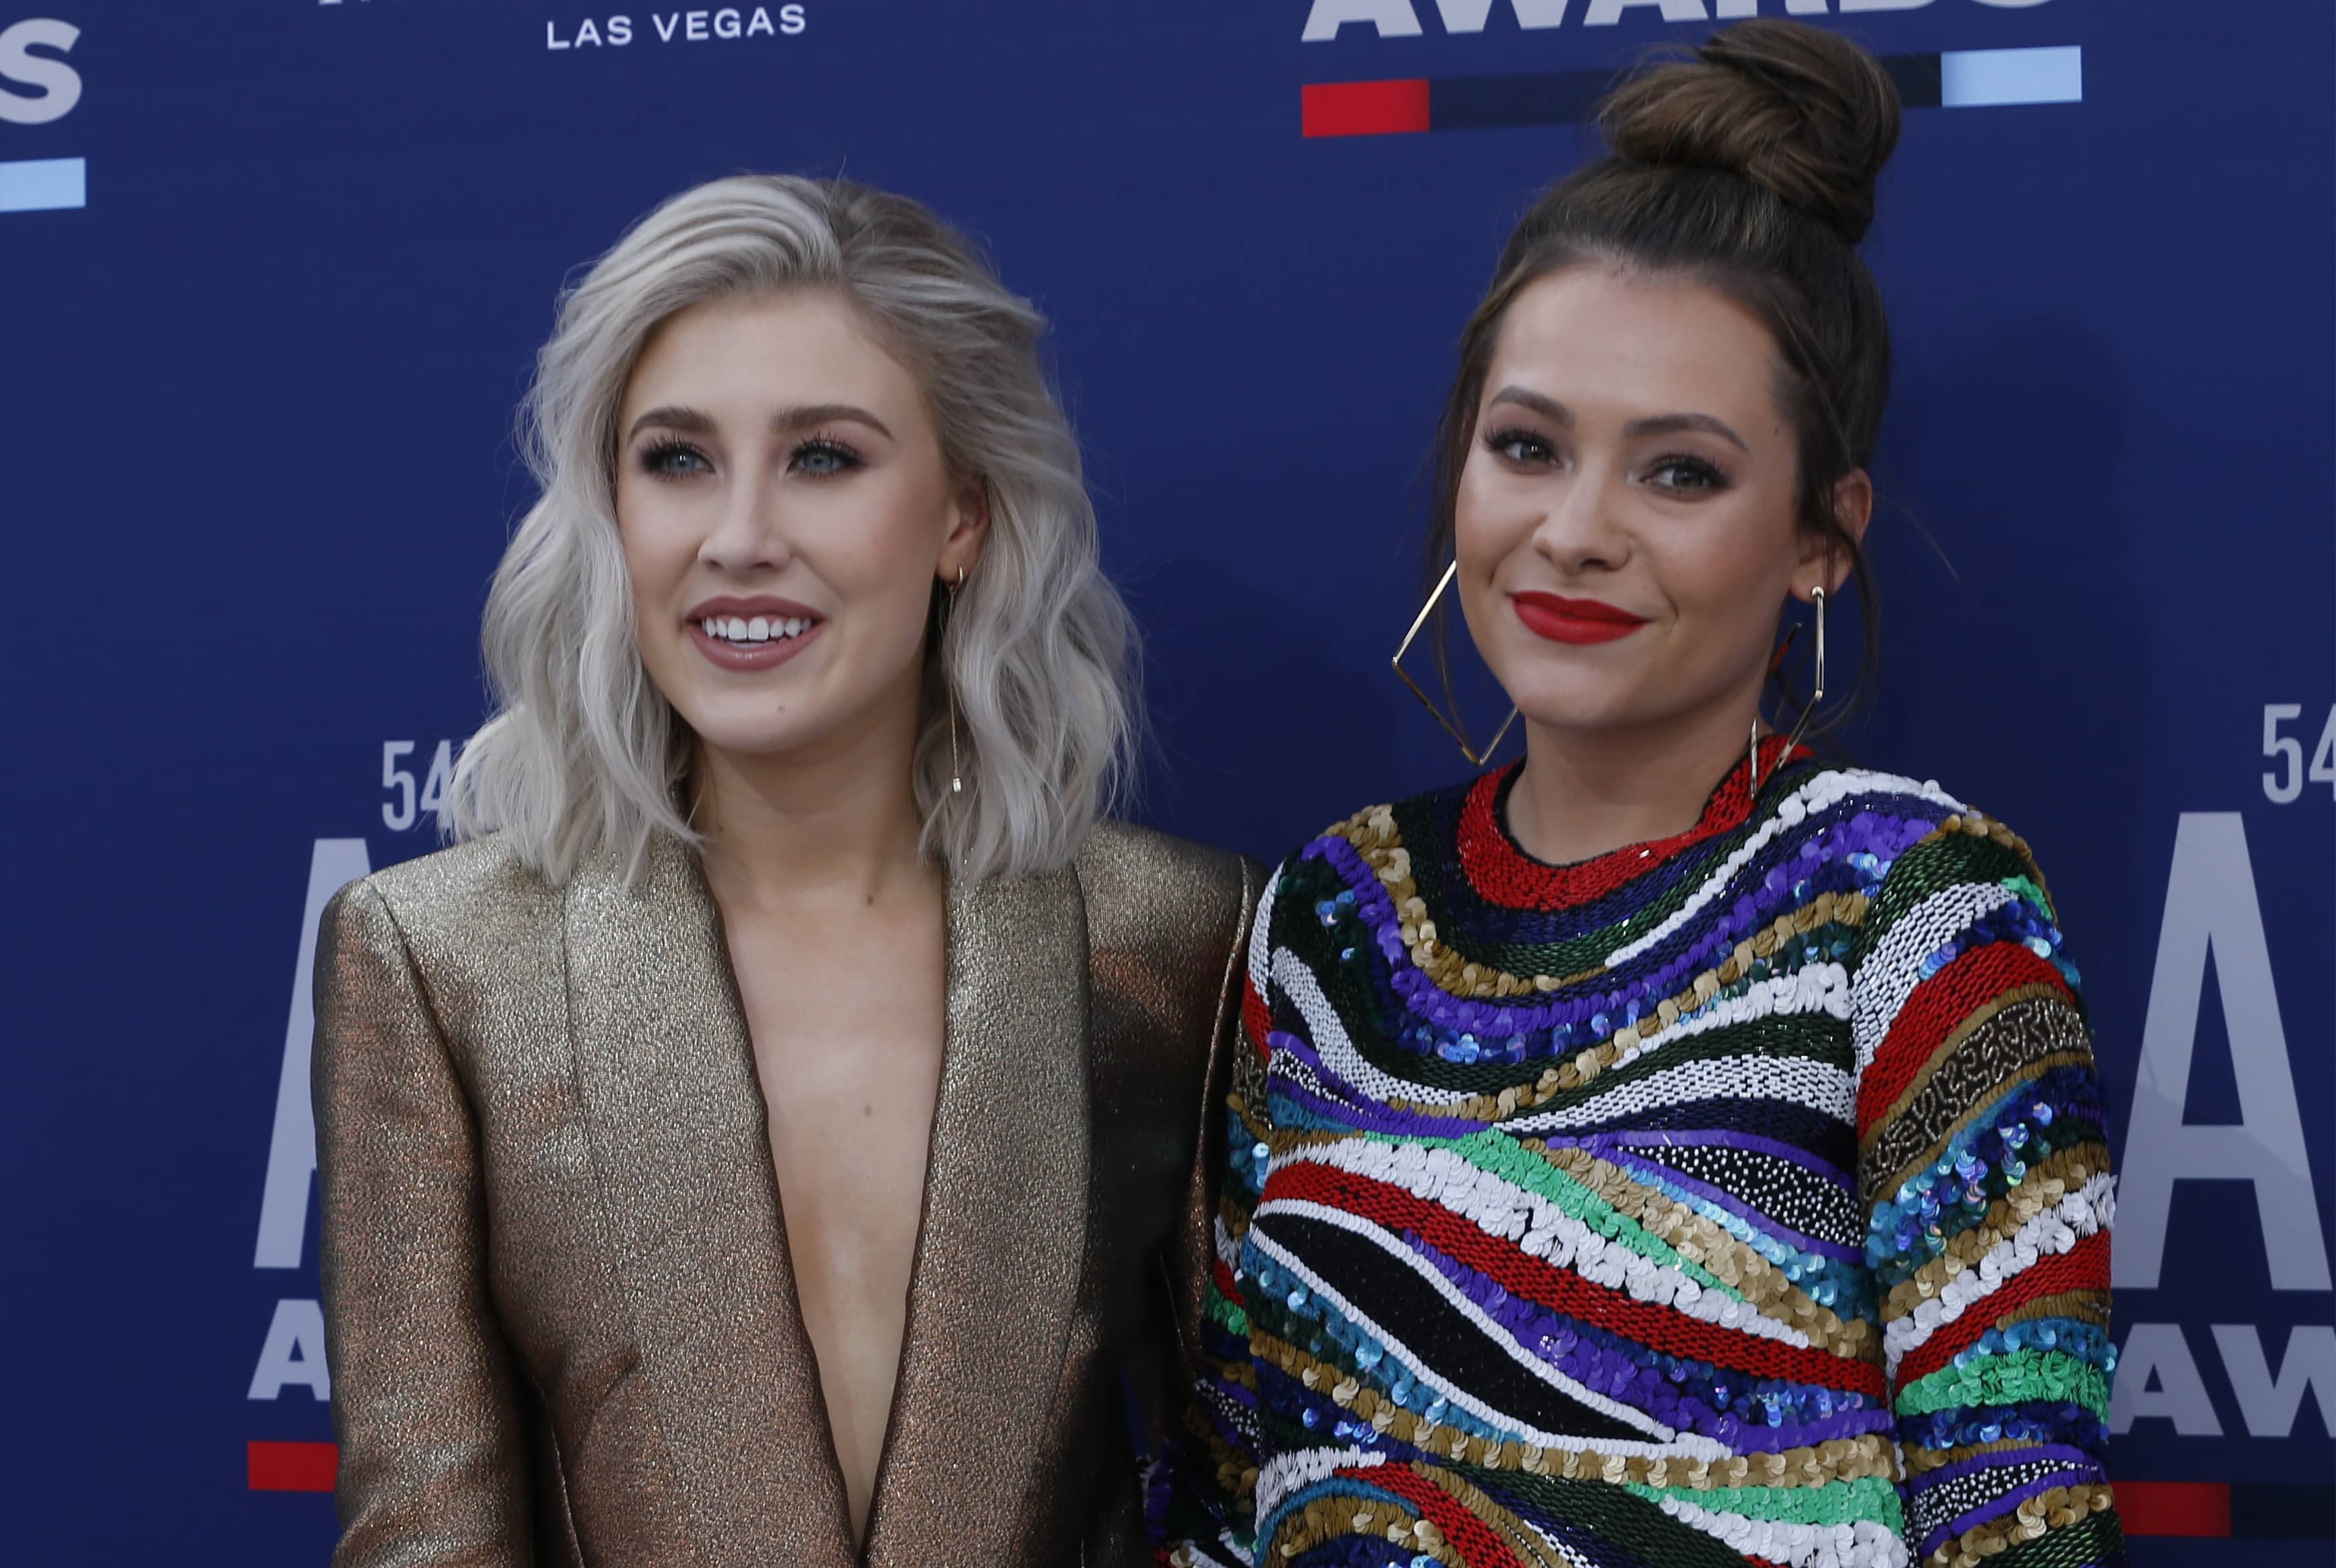 54th-academy-of-country-music-awards-arrivals-las-vegas-nevada-u-s-april-7-2019-maddie-and-tae